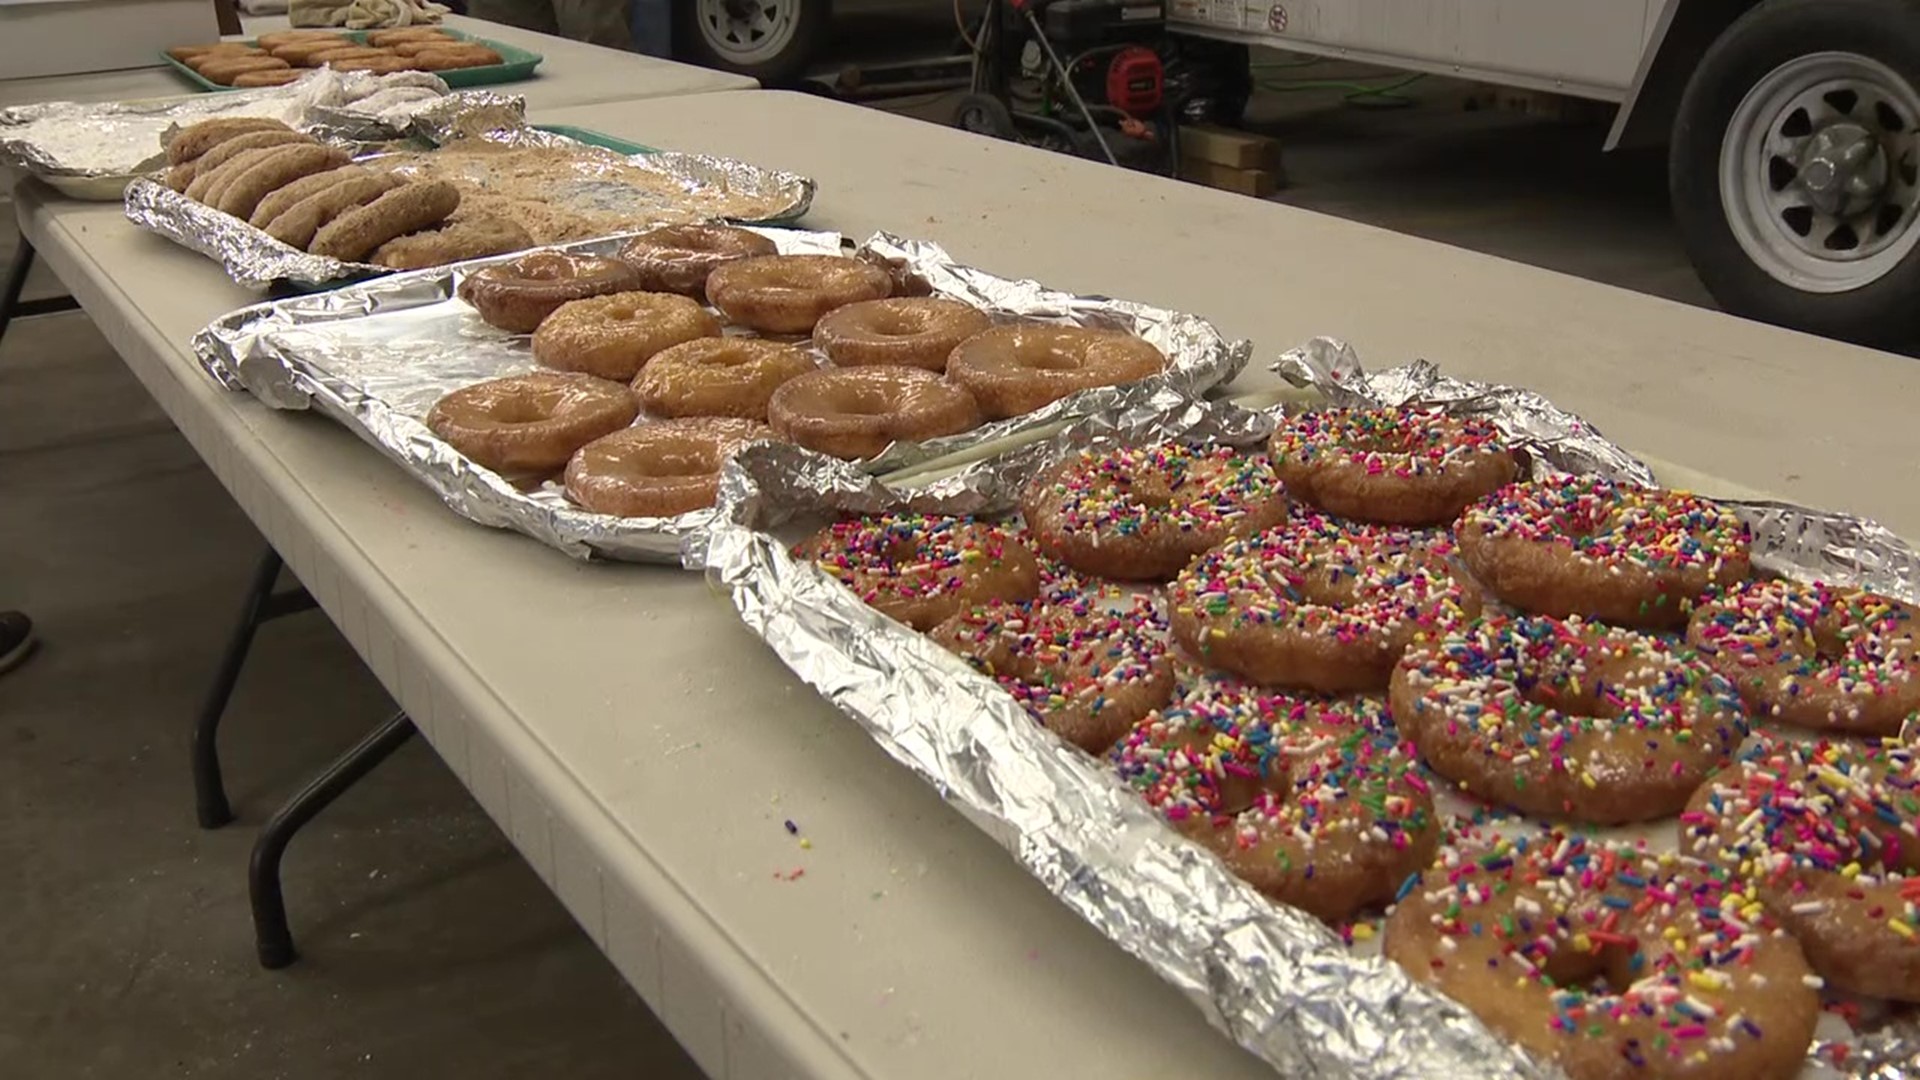 A fire company in Northumberland County was busy preparing doughnuts for its Fat Tuesday sale.